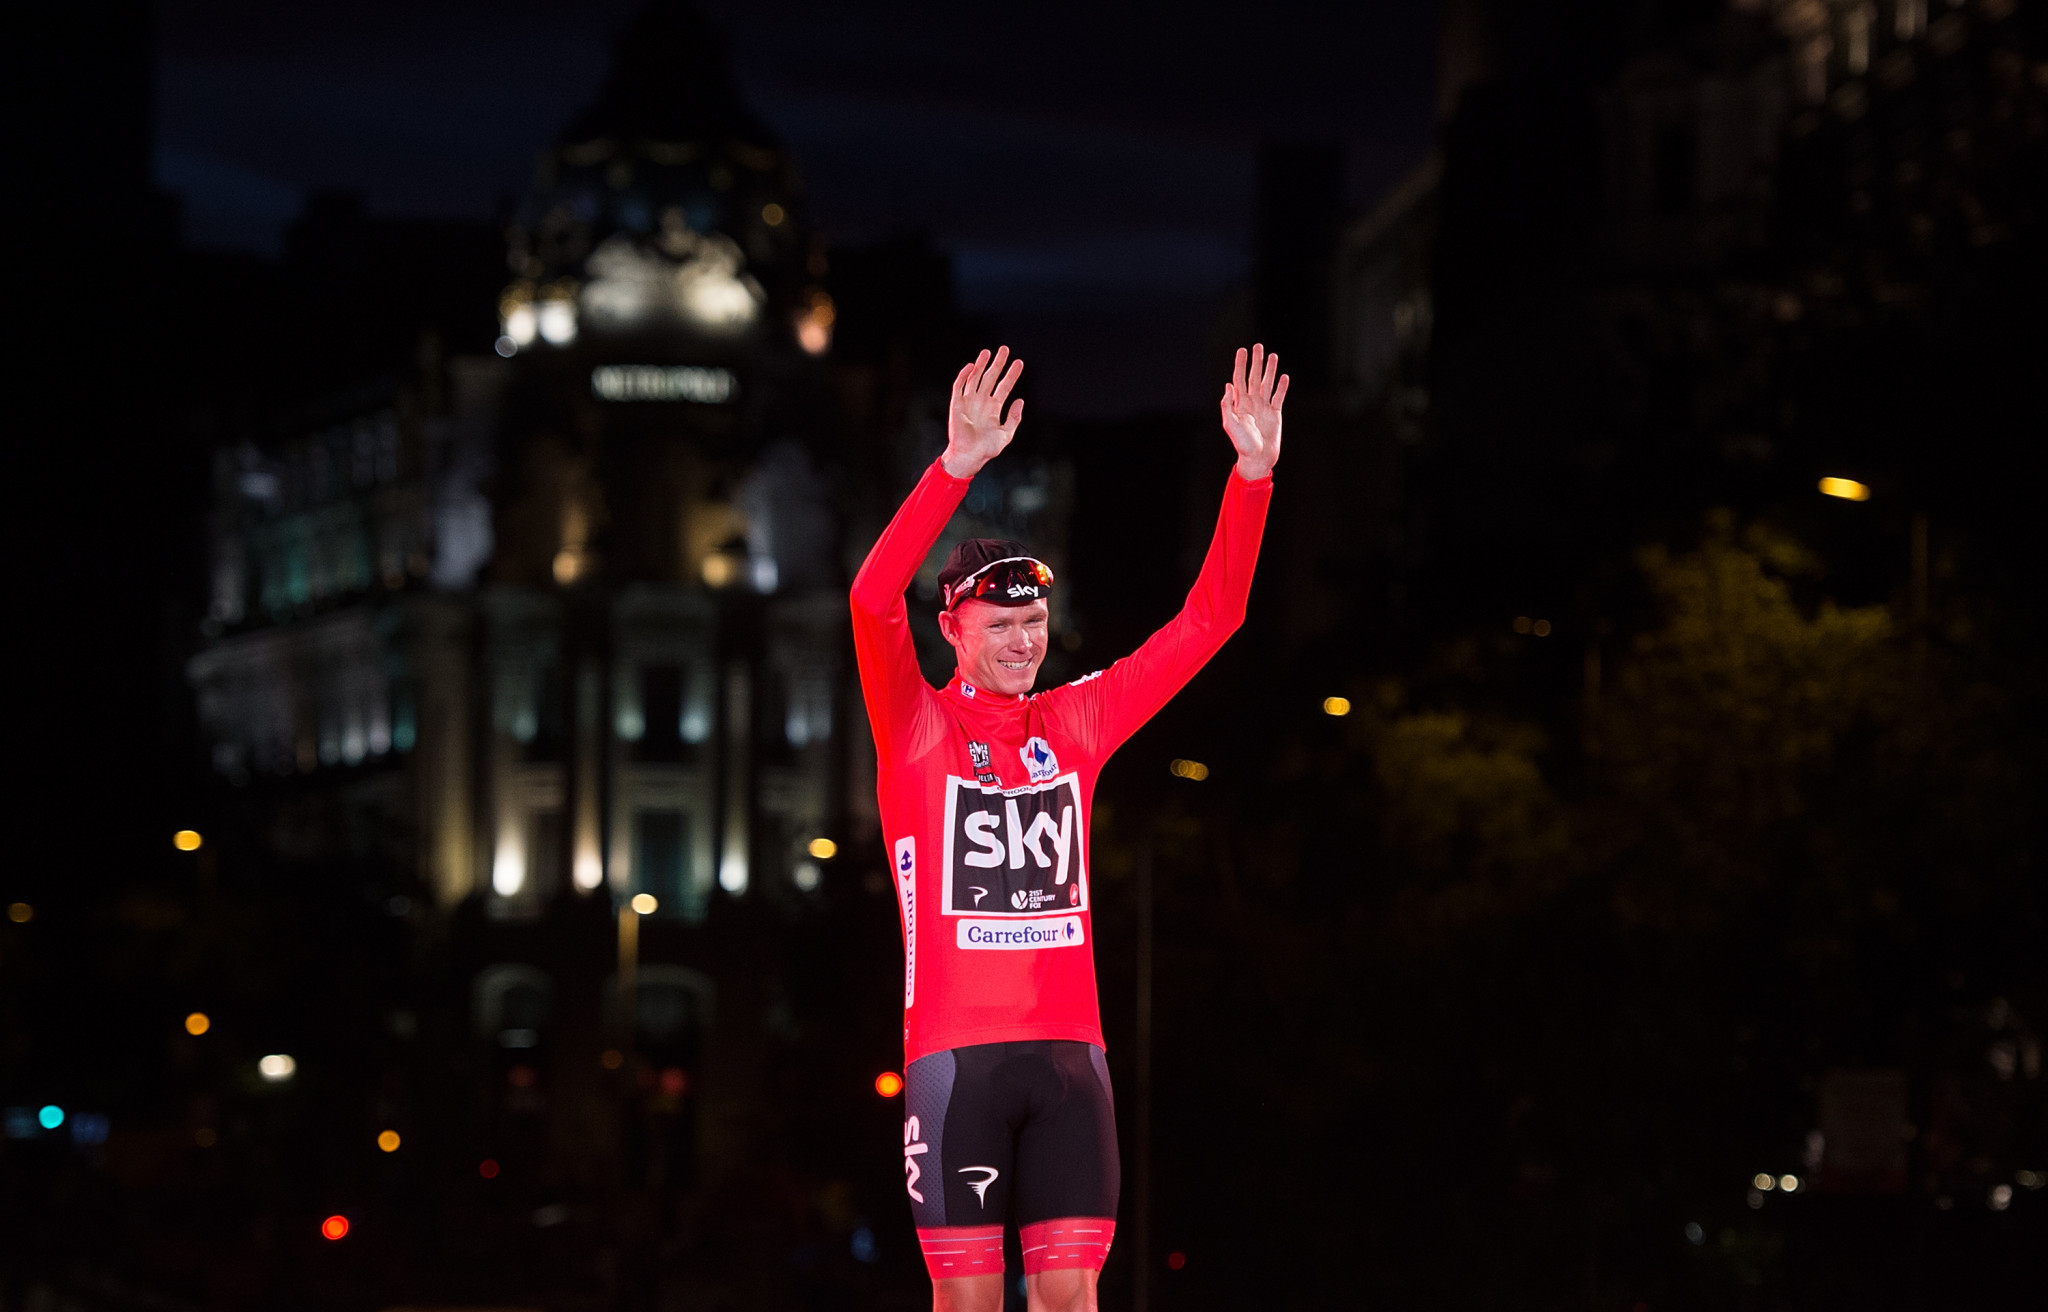 UCI request information from Froome after failed drugs test at Vuelta a España